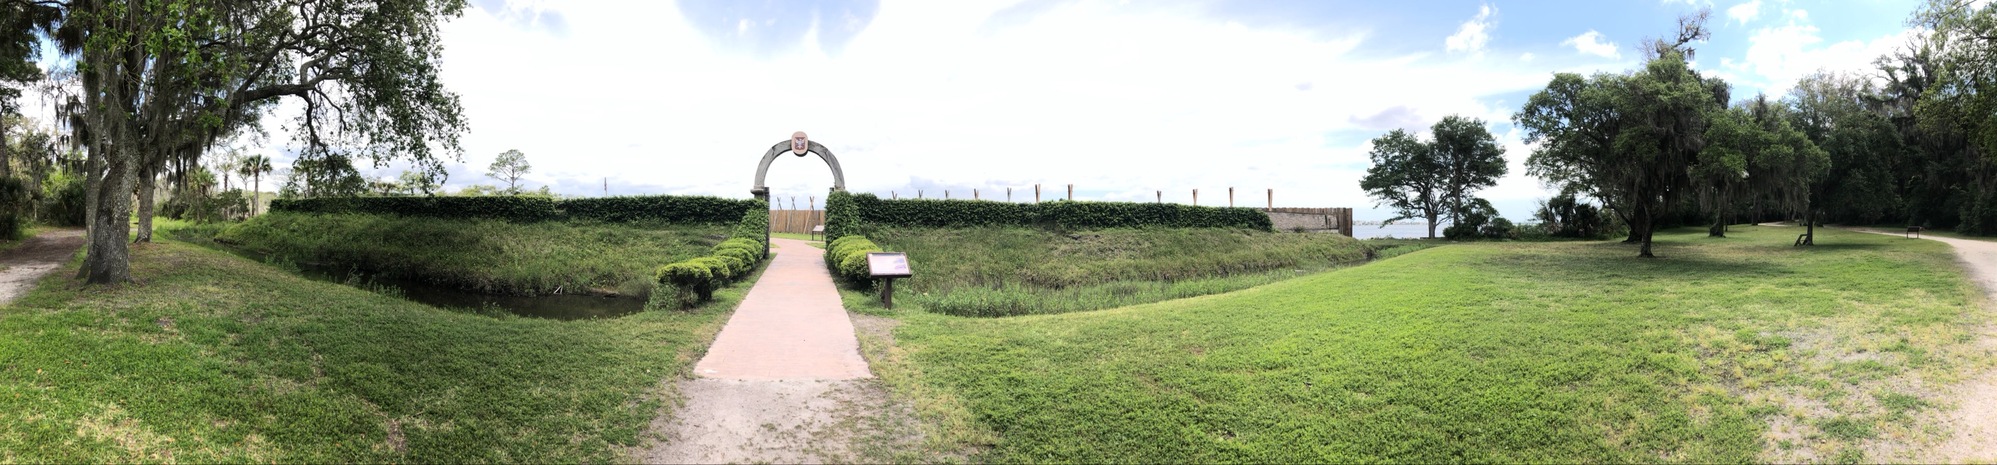 panoramic image of the arched fort gate with trees around the fort